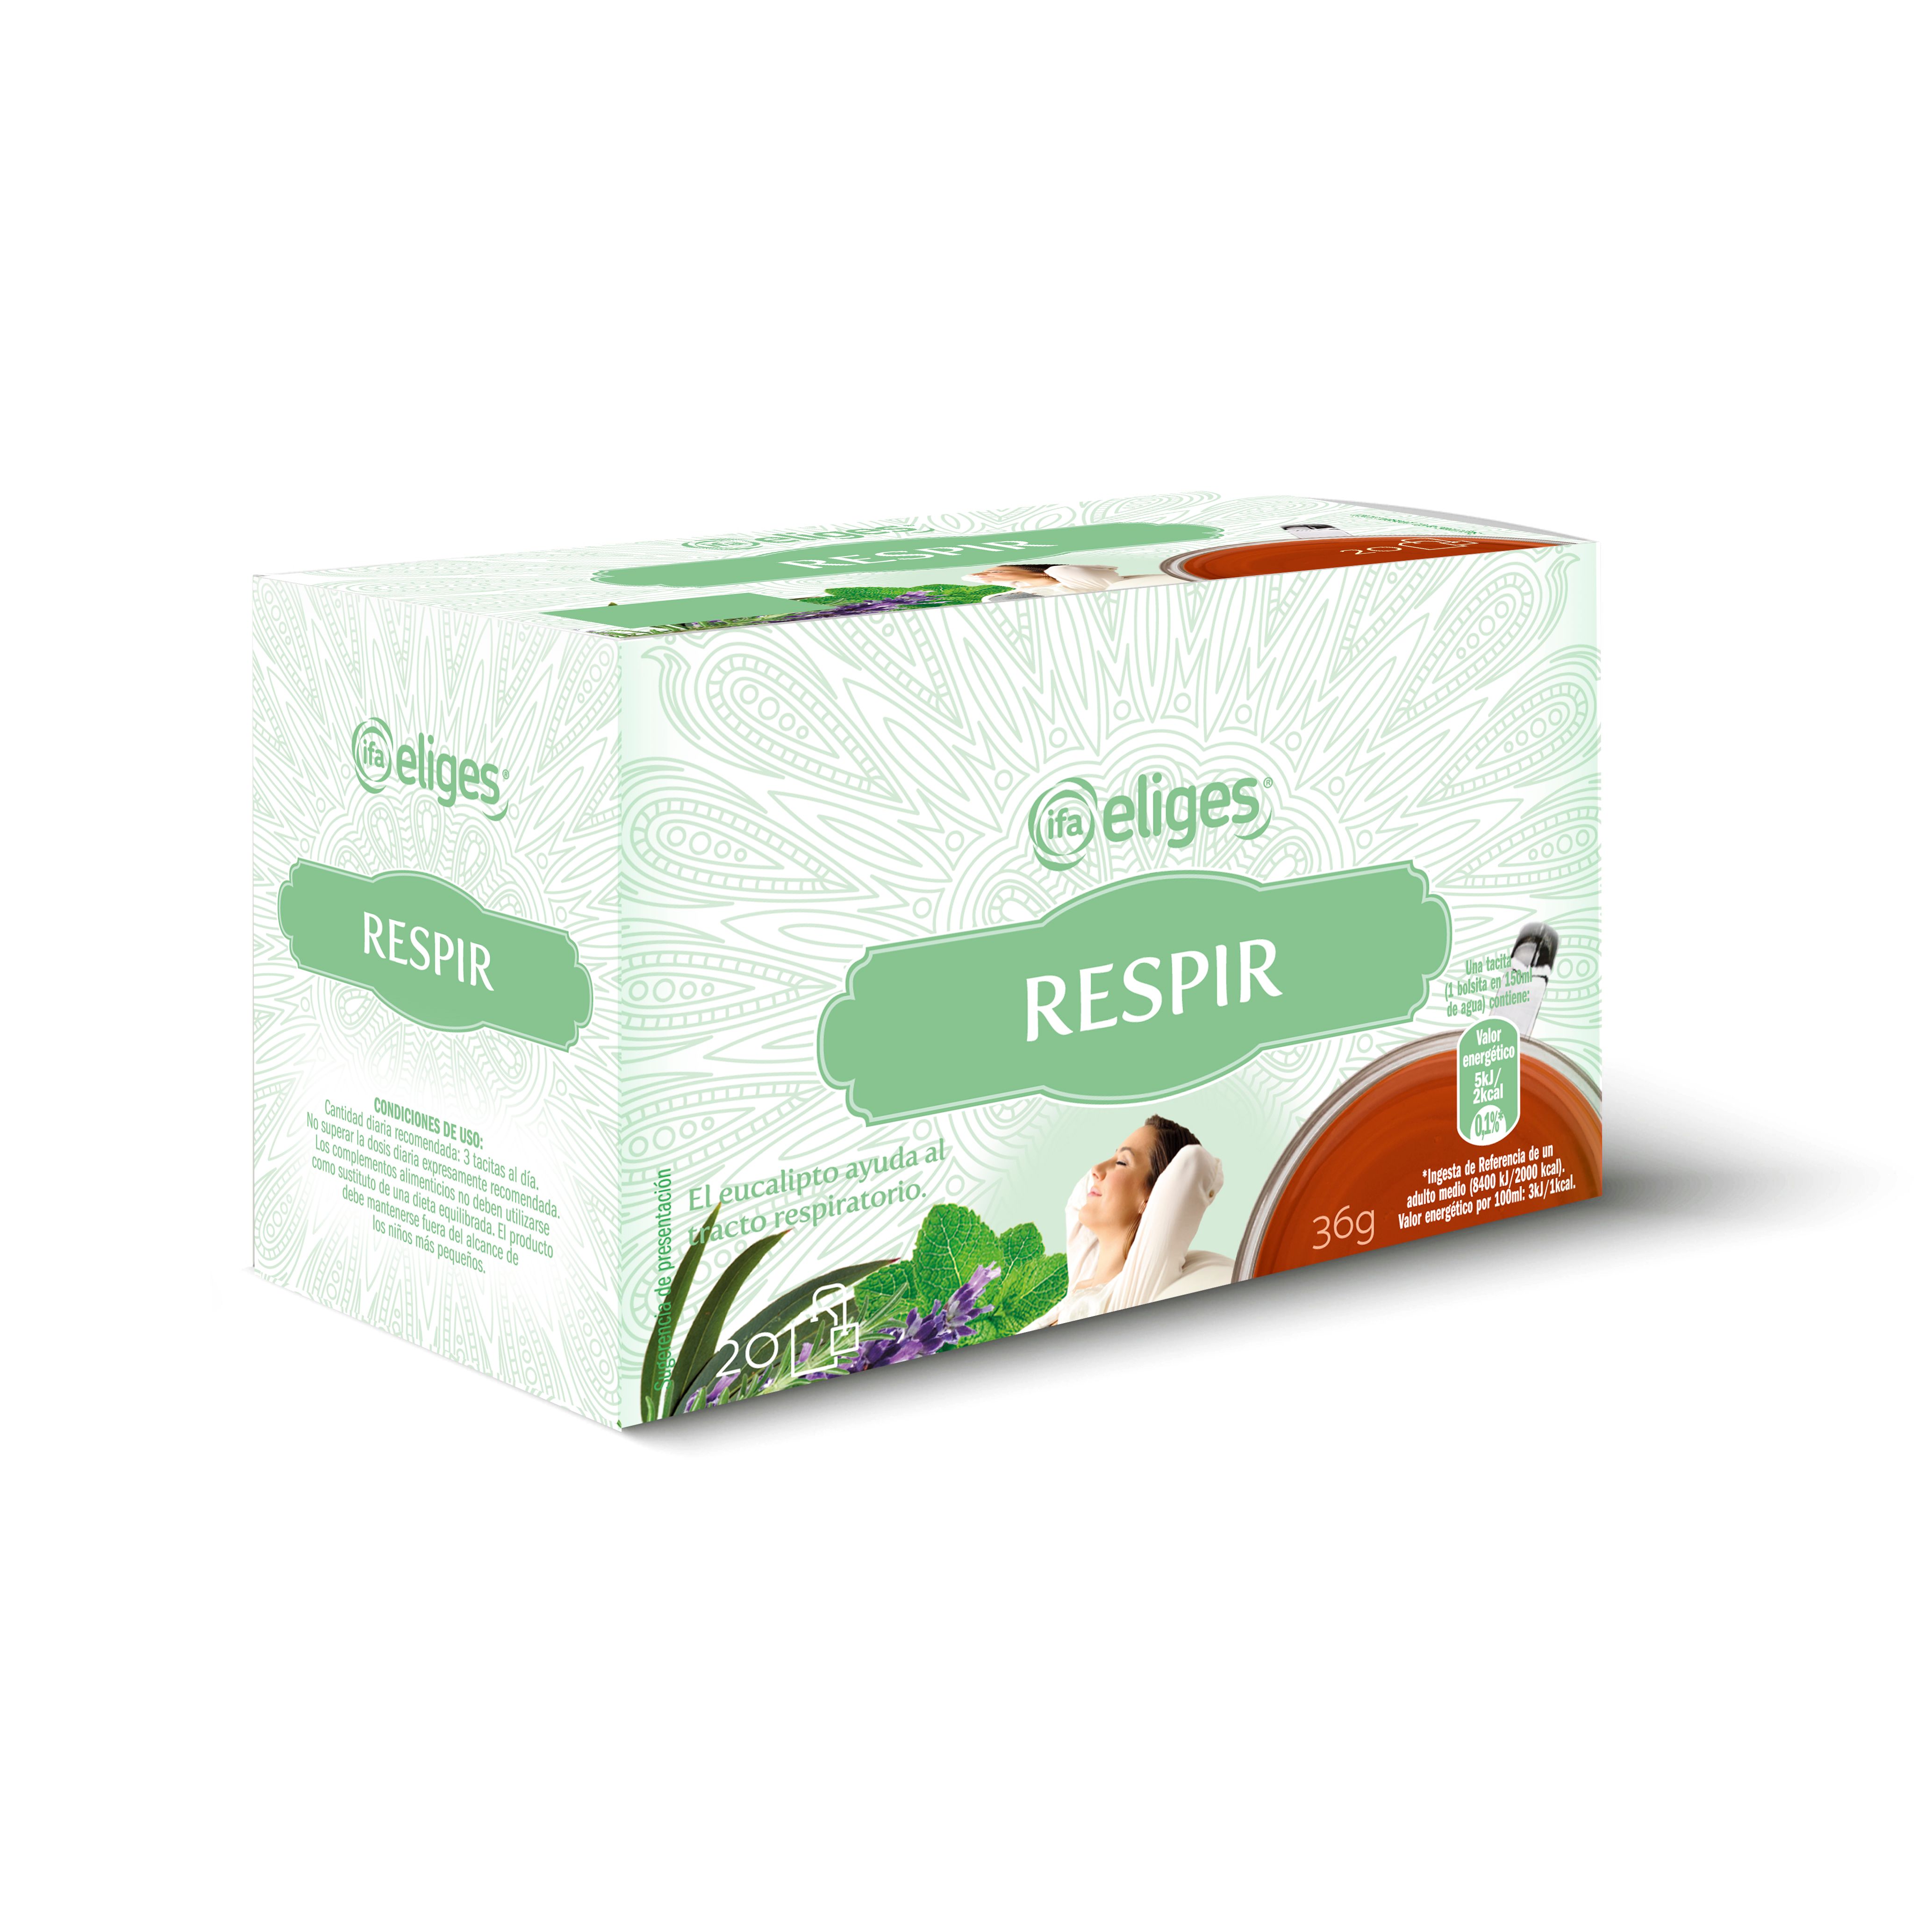 INFUSION RESPIR IFA ELIGES 20 UNIDADES